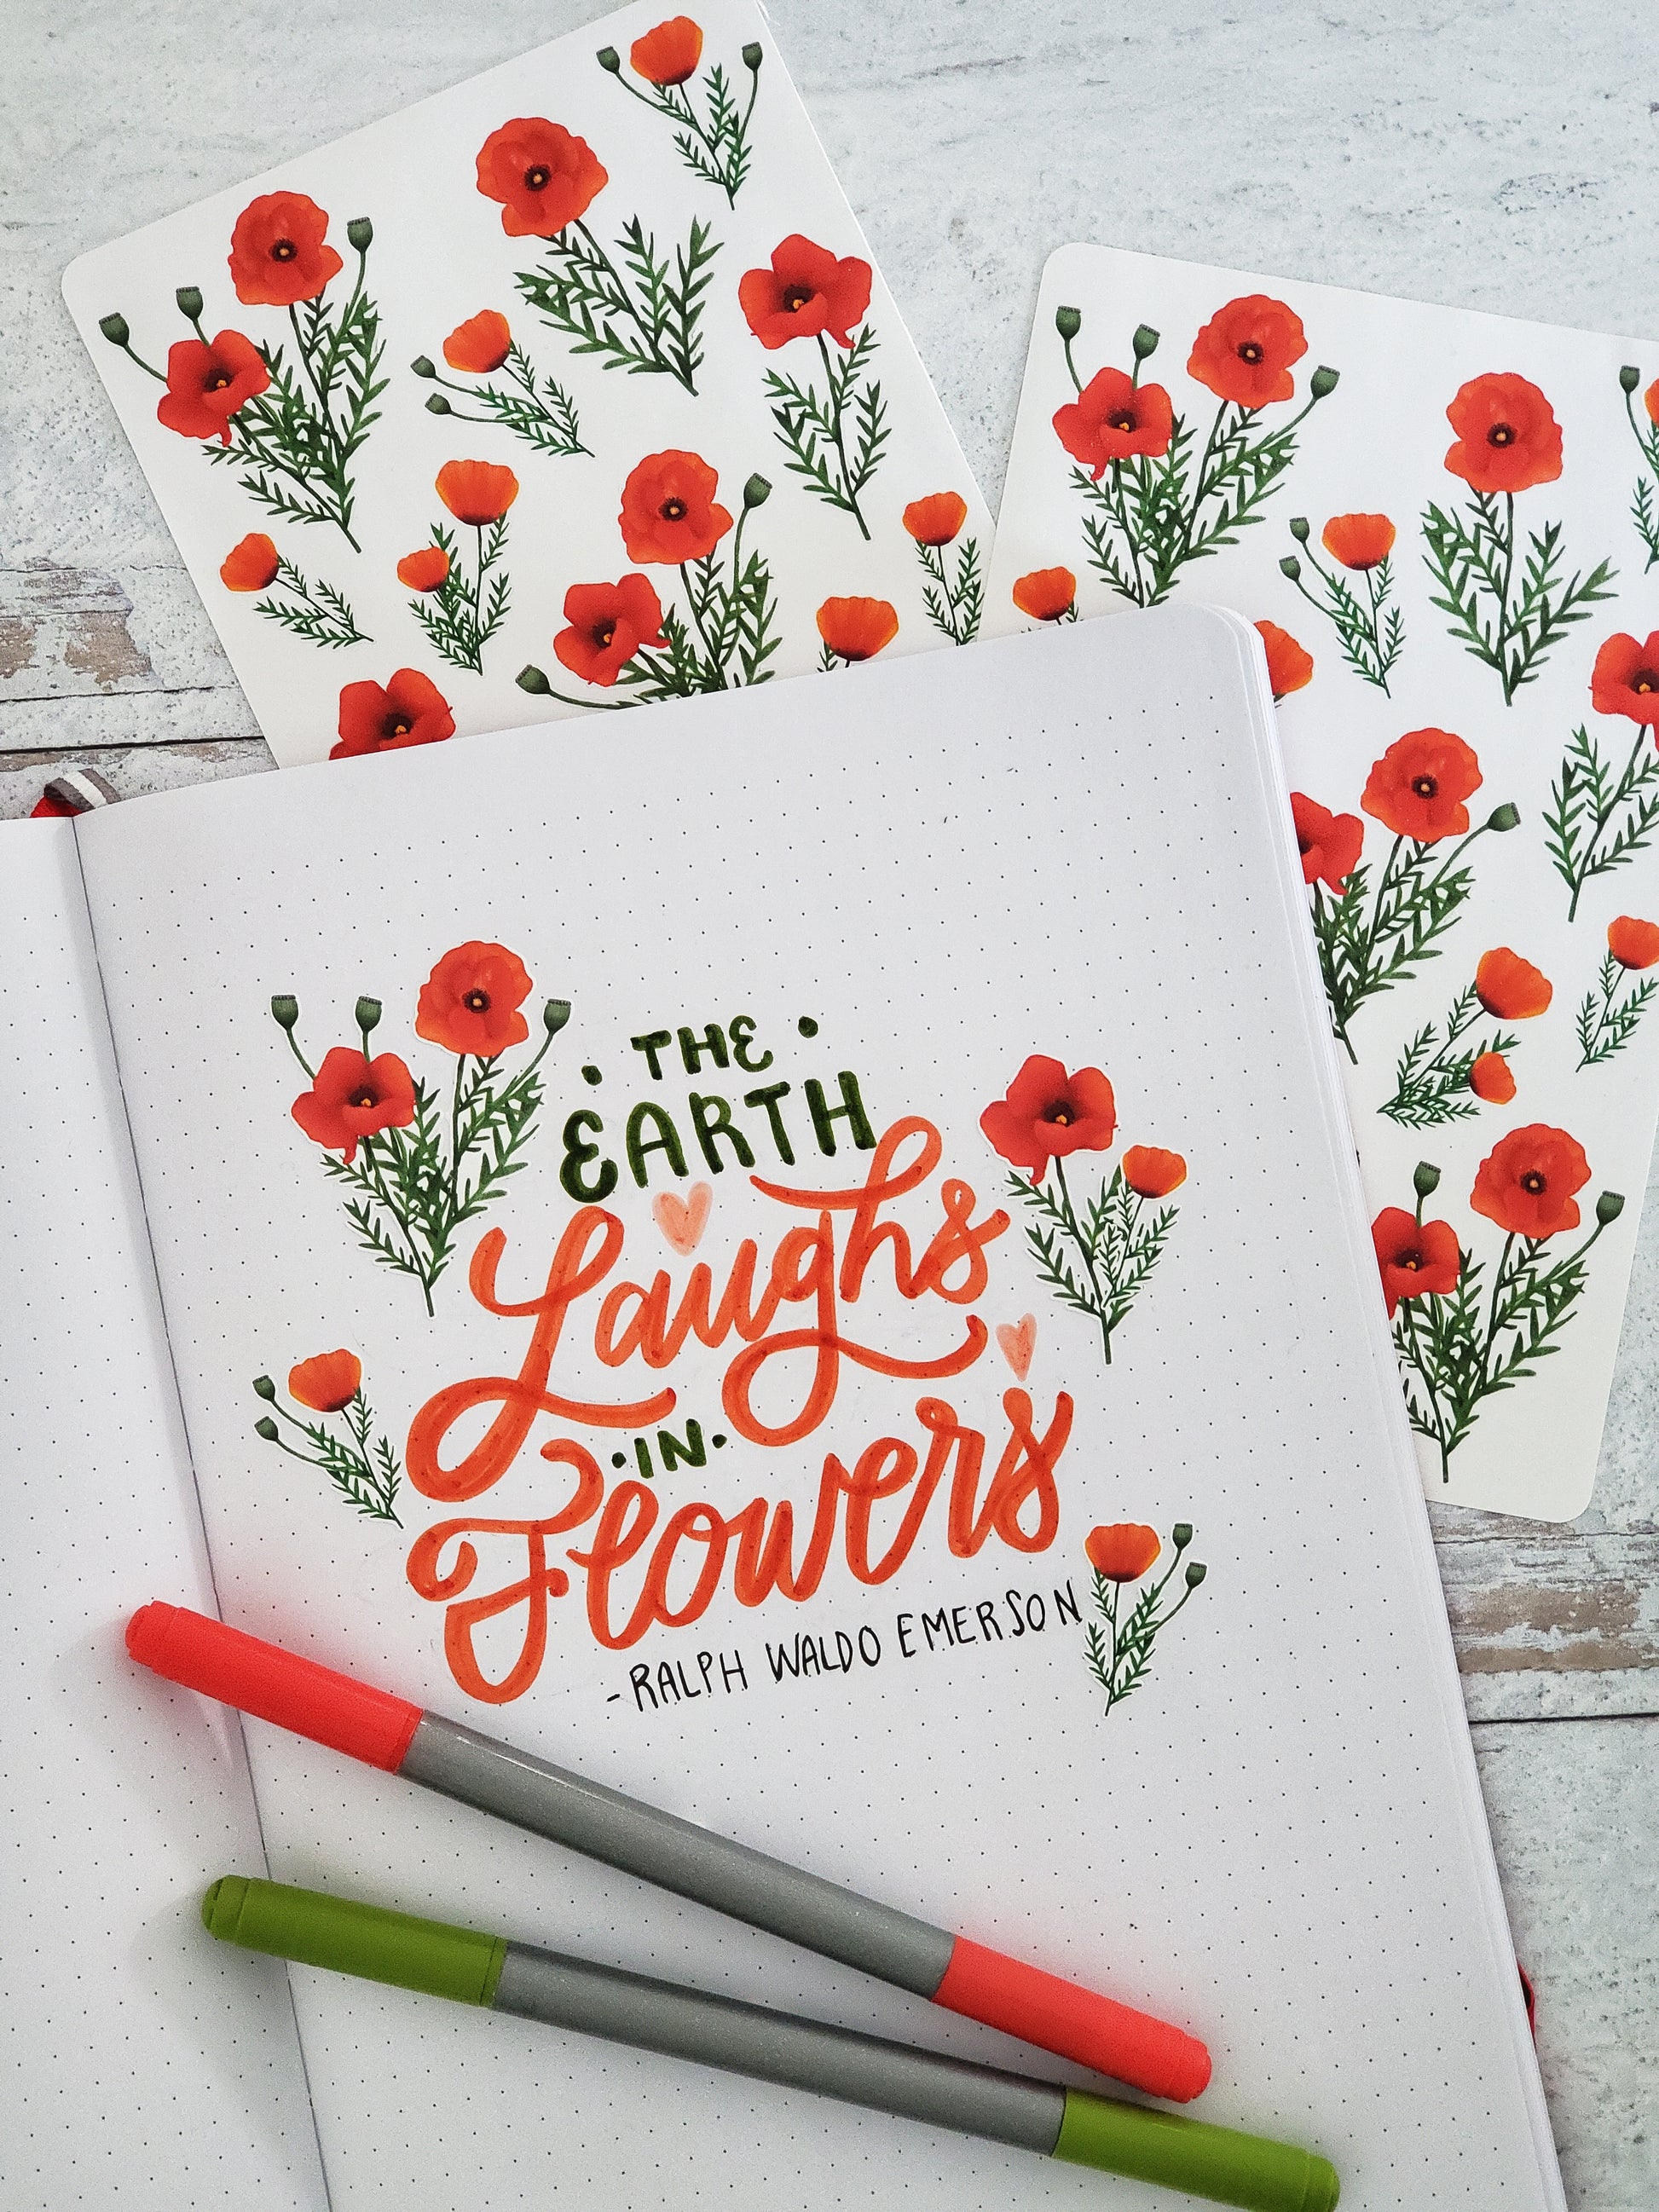 A few of the poppy stickers decorating a hand lettered quote written in a journal. The quote reads "the Earth Laughs in Flowers - Ralph Waldo Emerson"